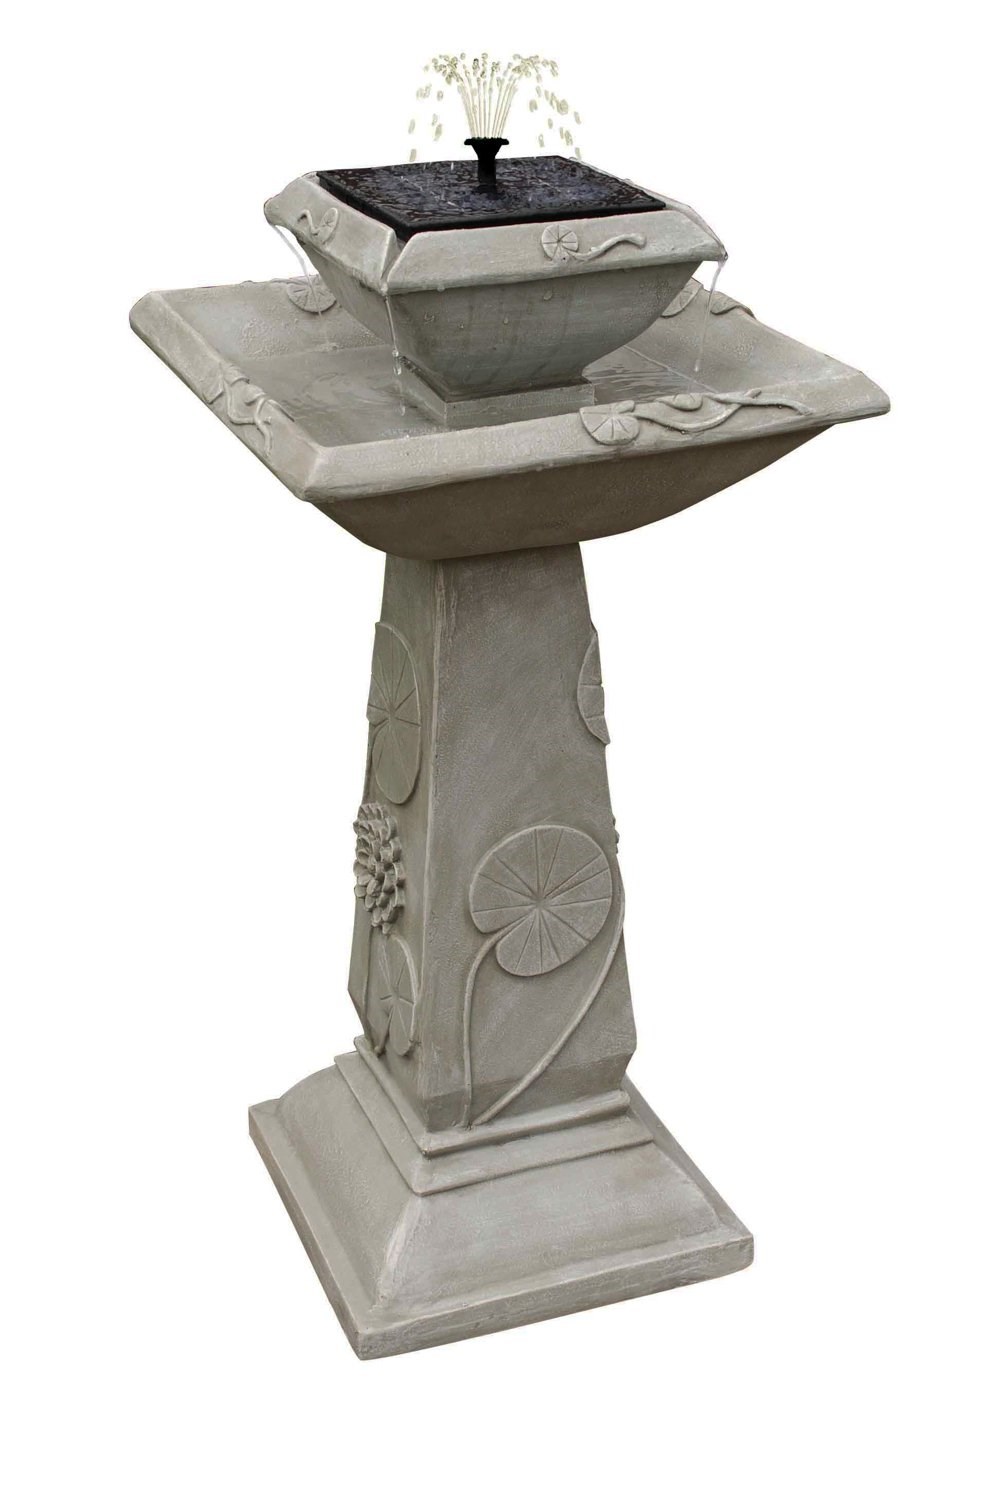 H79cm Spring Lilly Solar Bird Bath Water Feature with Lights by Solaray